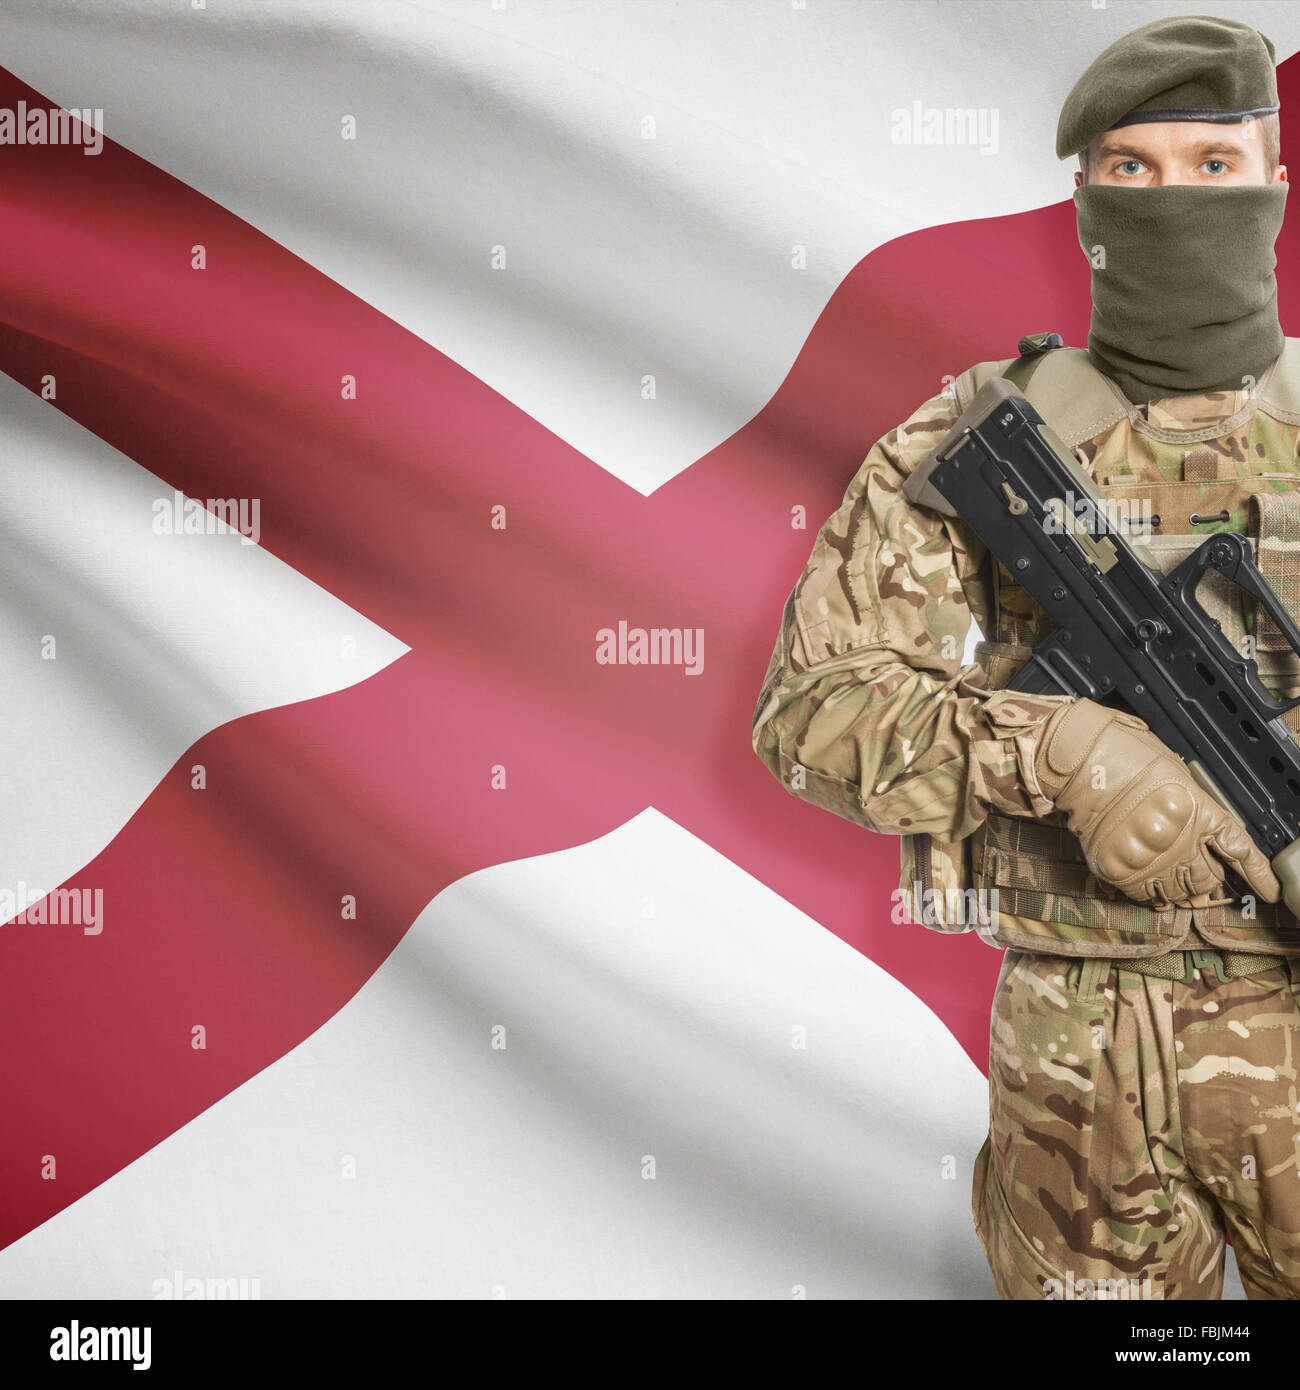 Soldier with machine gun and USA state flag on background series - Alabama Stock Photo